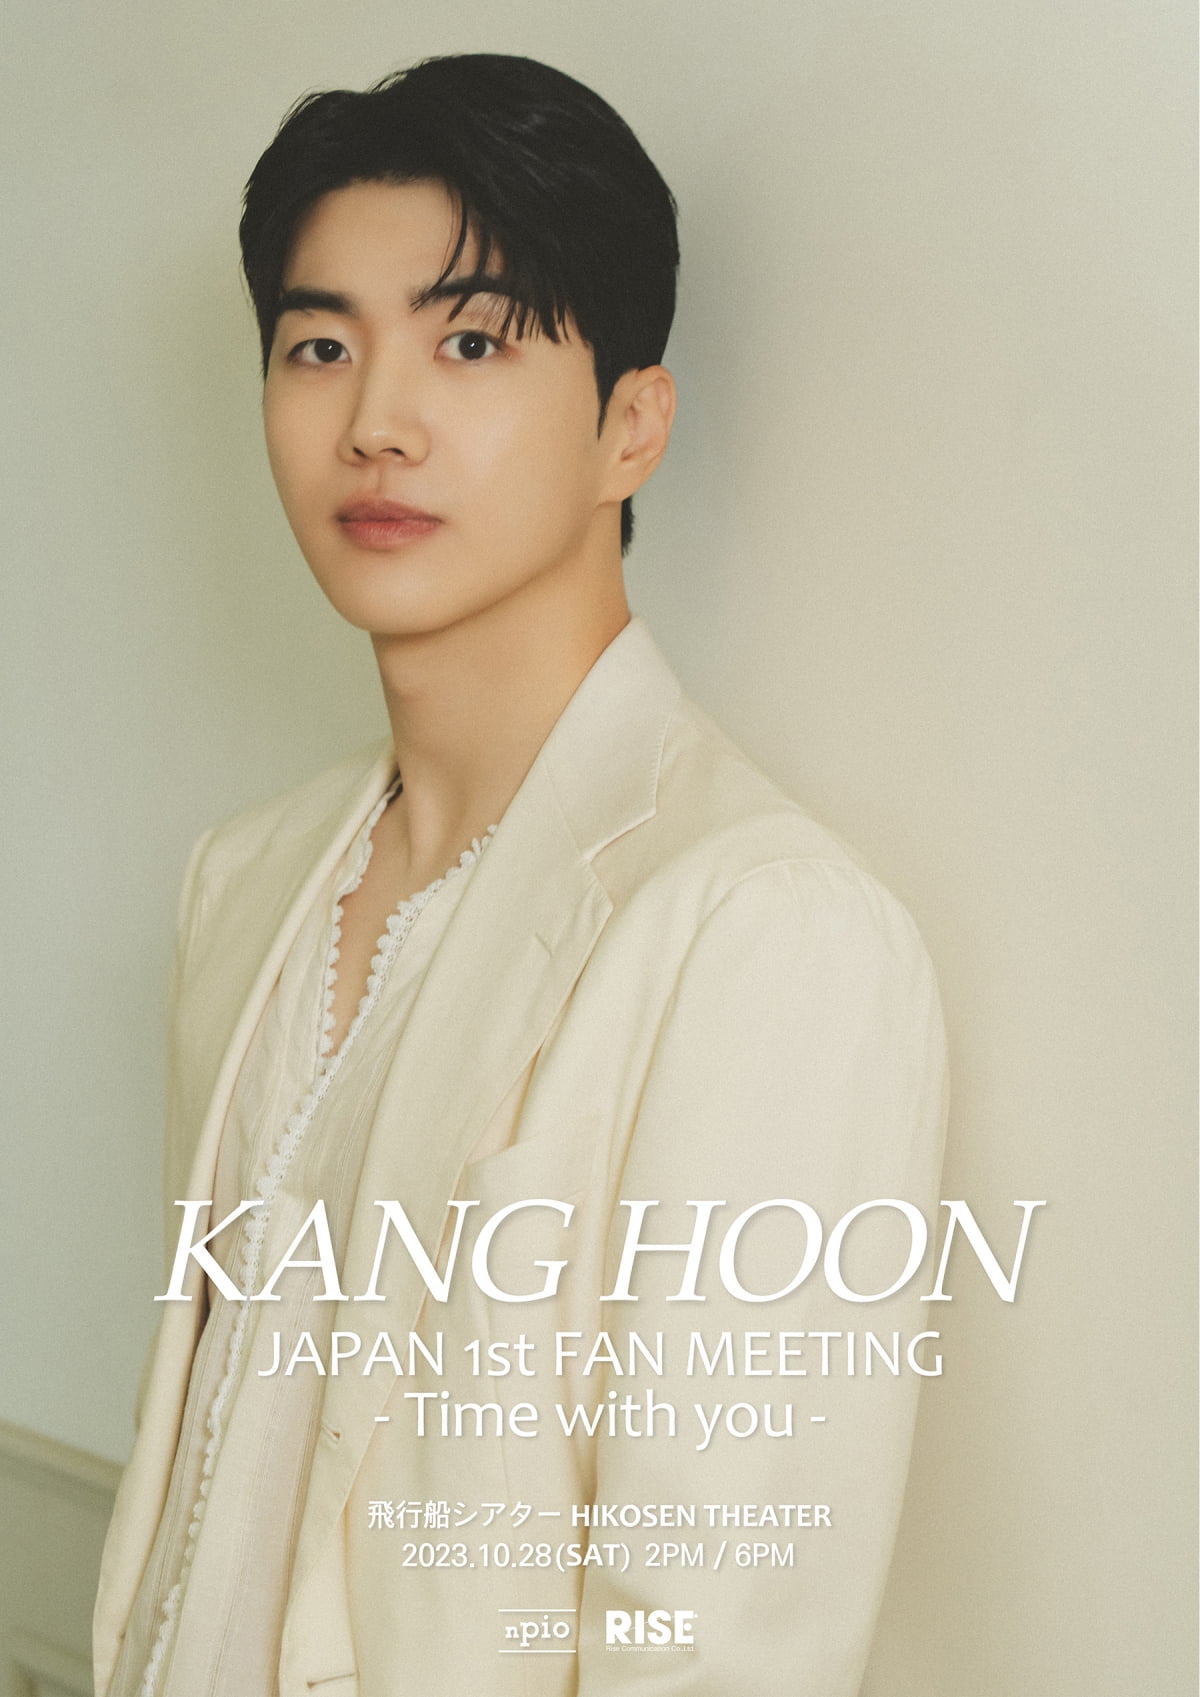 Hoon Kang holds a fan meeting in Japan in October